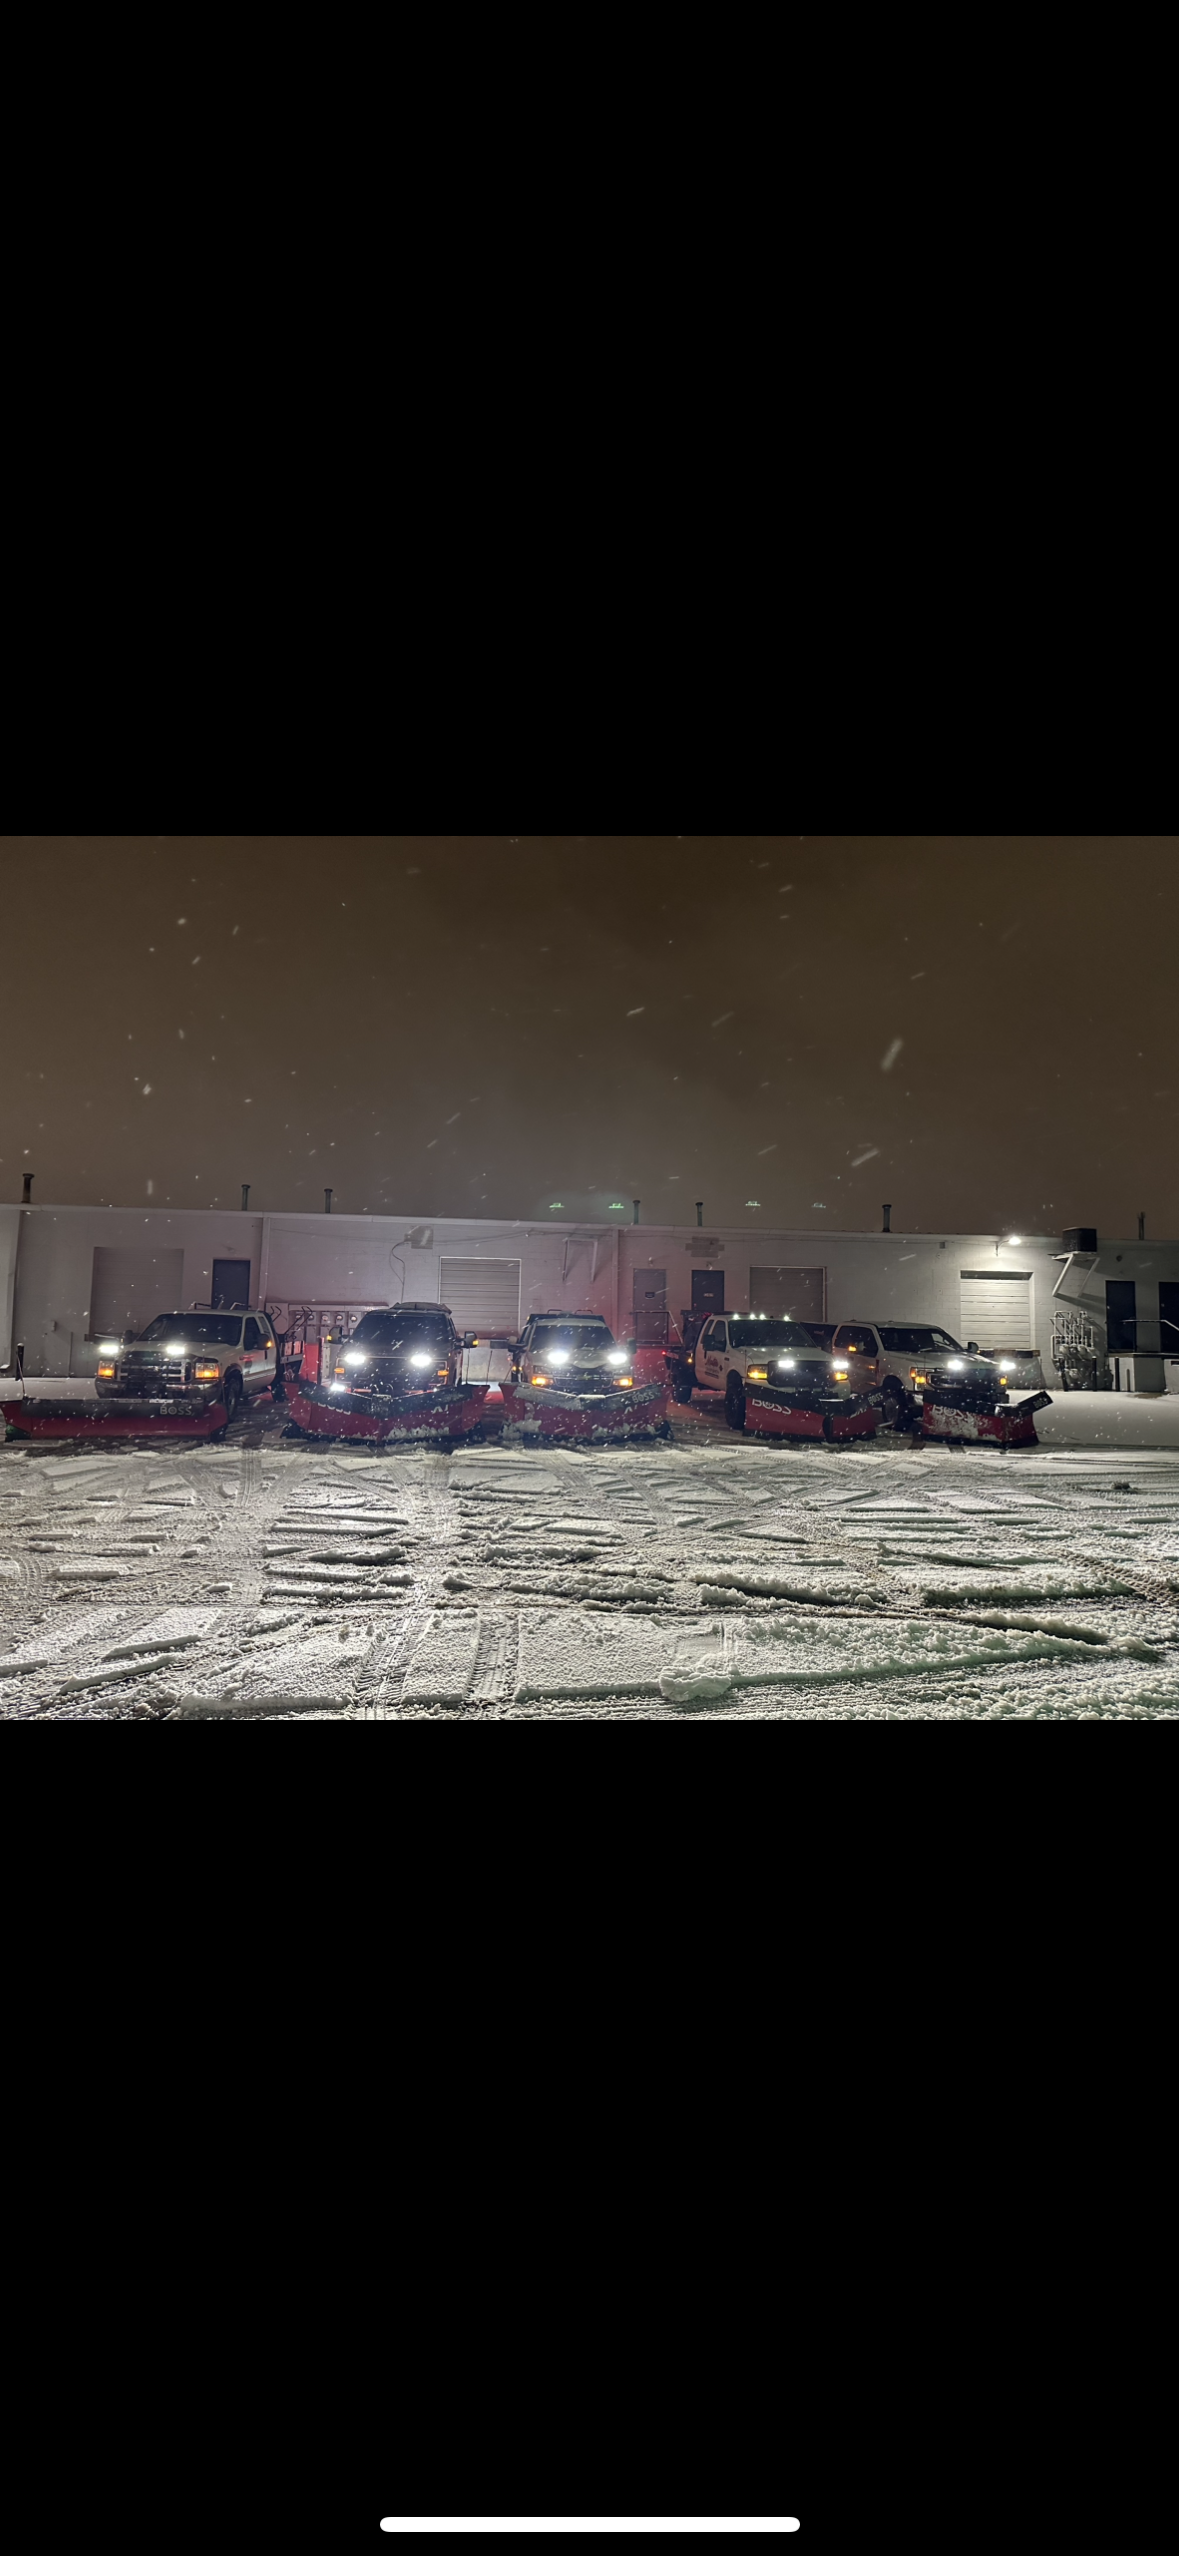 Snow Plowing Trucks lined up ready to snow plow